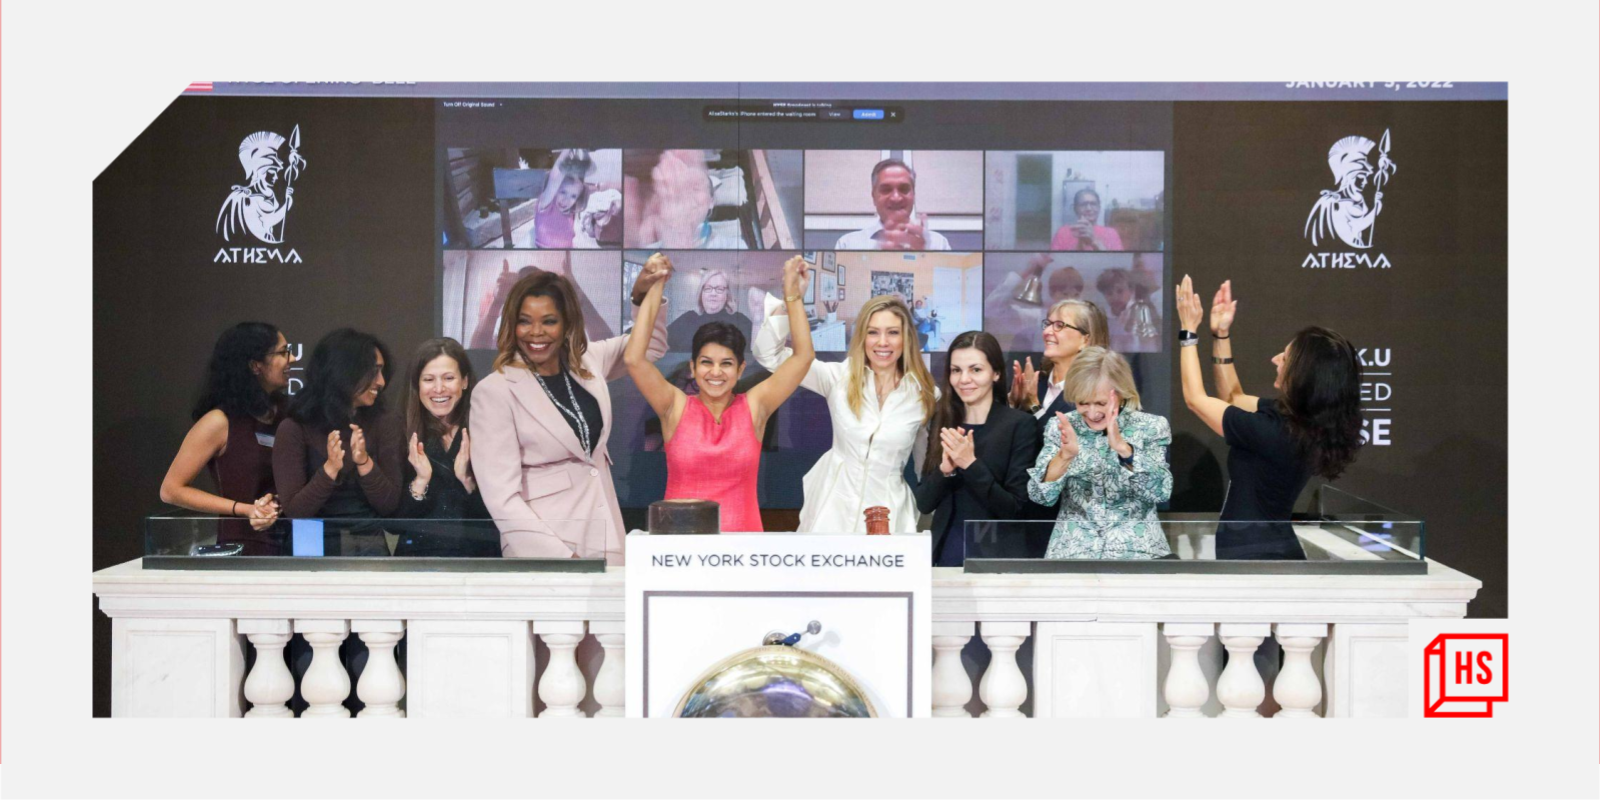 The all-women and immigrant team at Athena SPACs rings the bell at NYSE